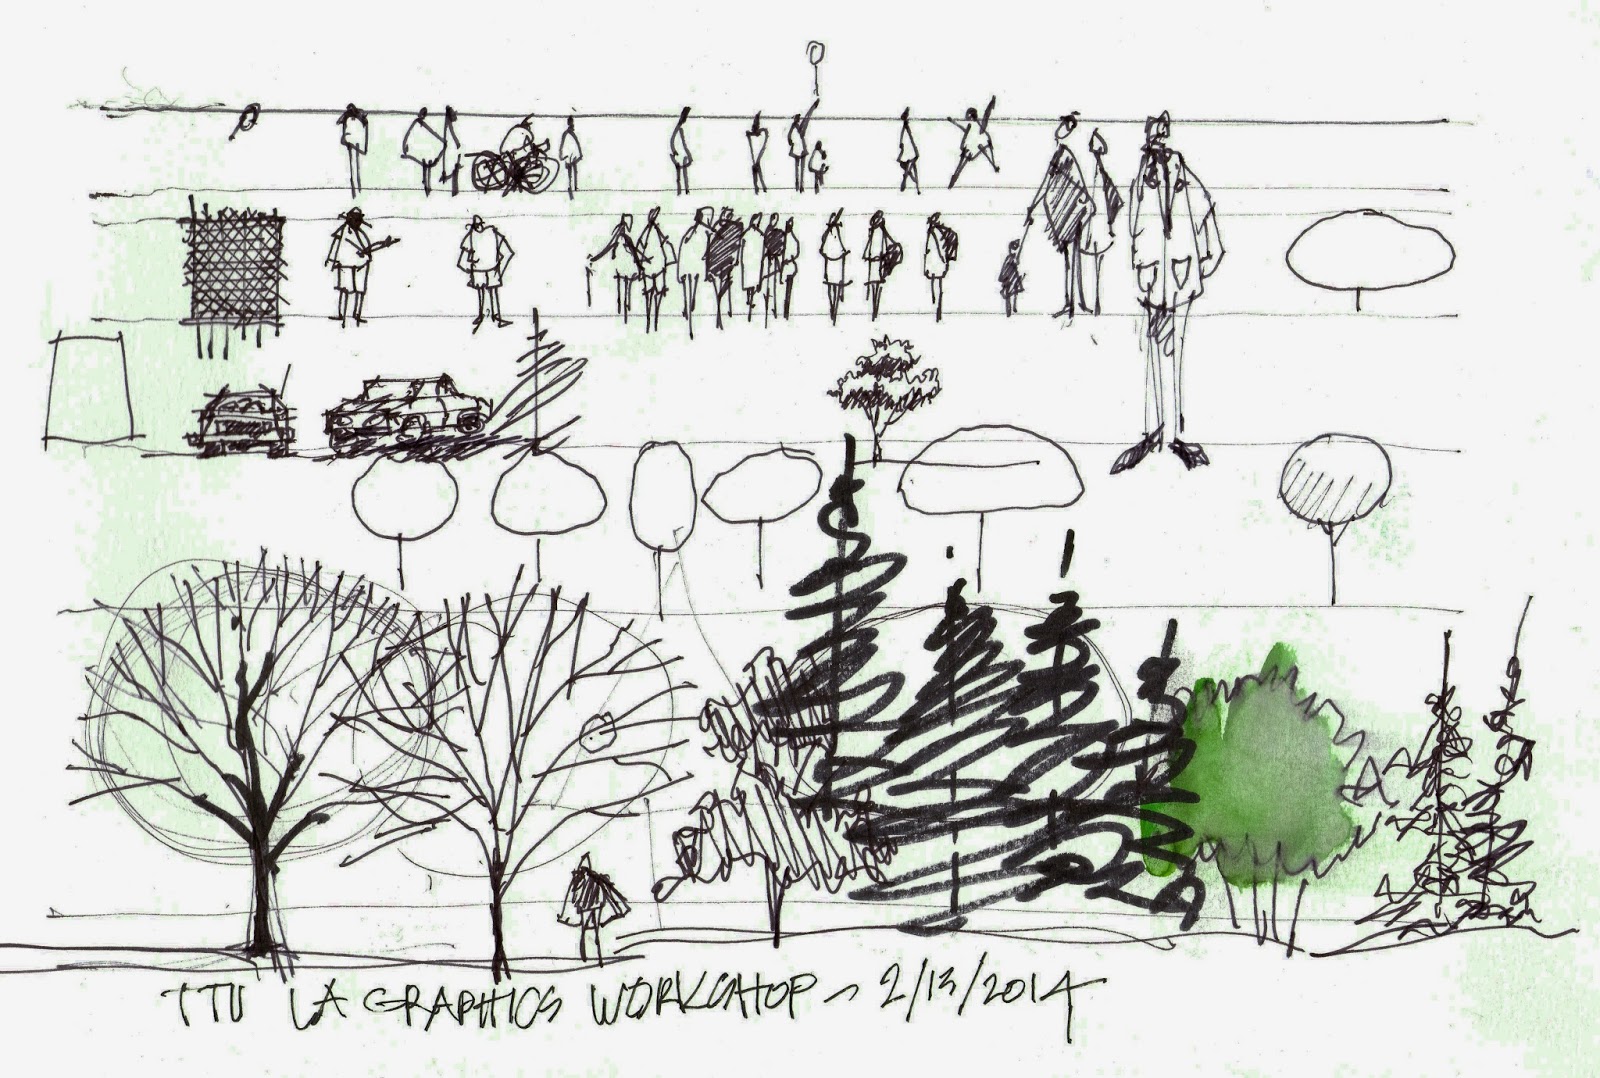 ... great time sketching with Texas Tech Landscape Architecture students